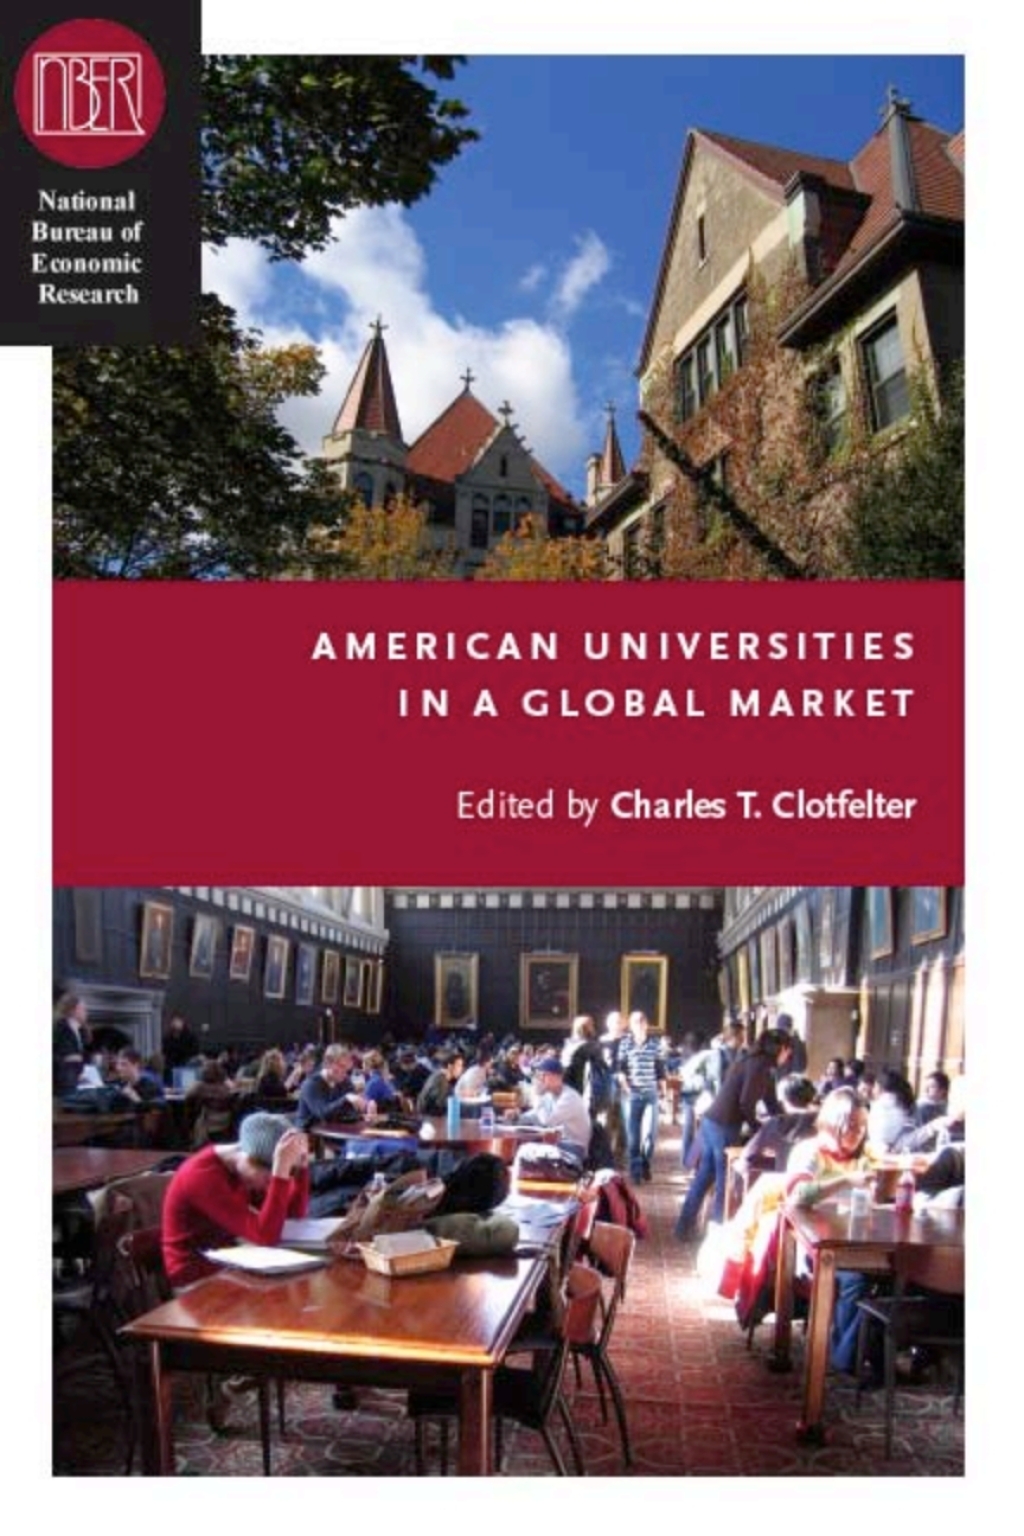 American Universities in a Global Market (eBook) - Charles T. Clotfelter